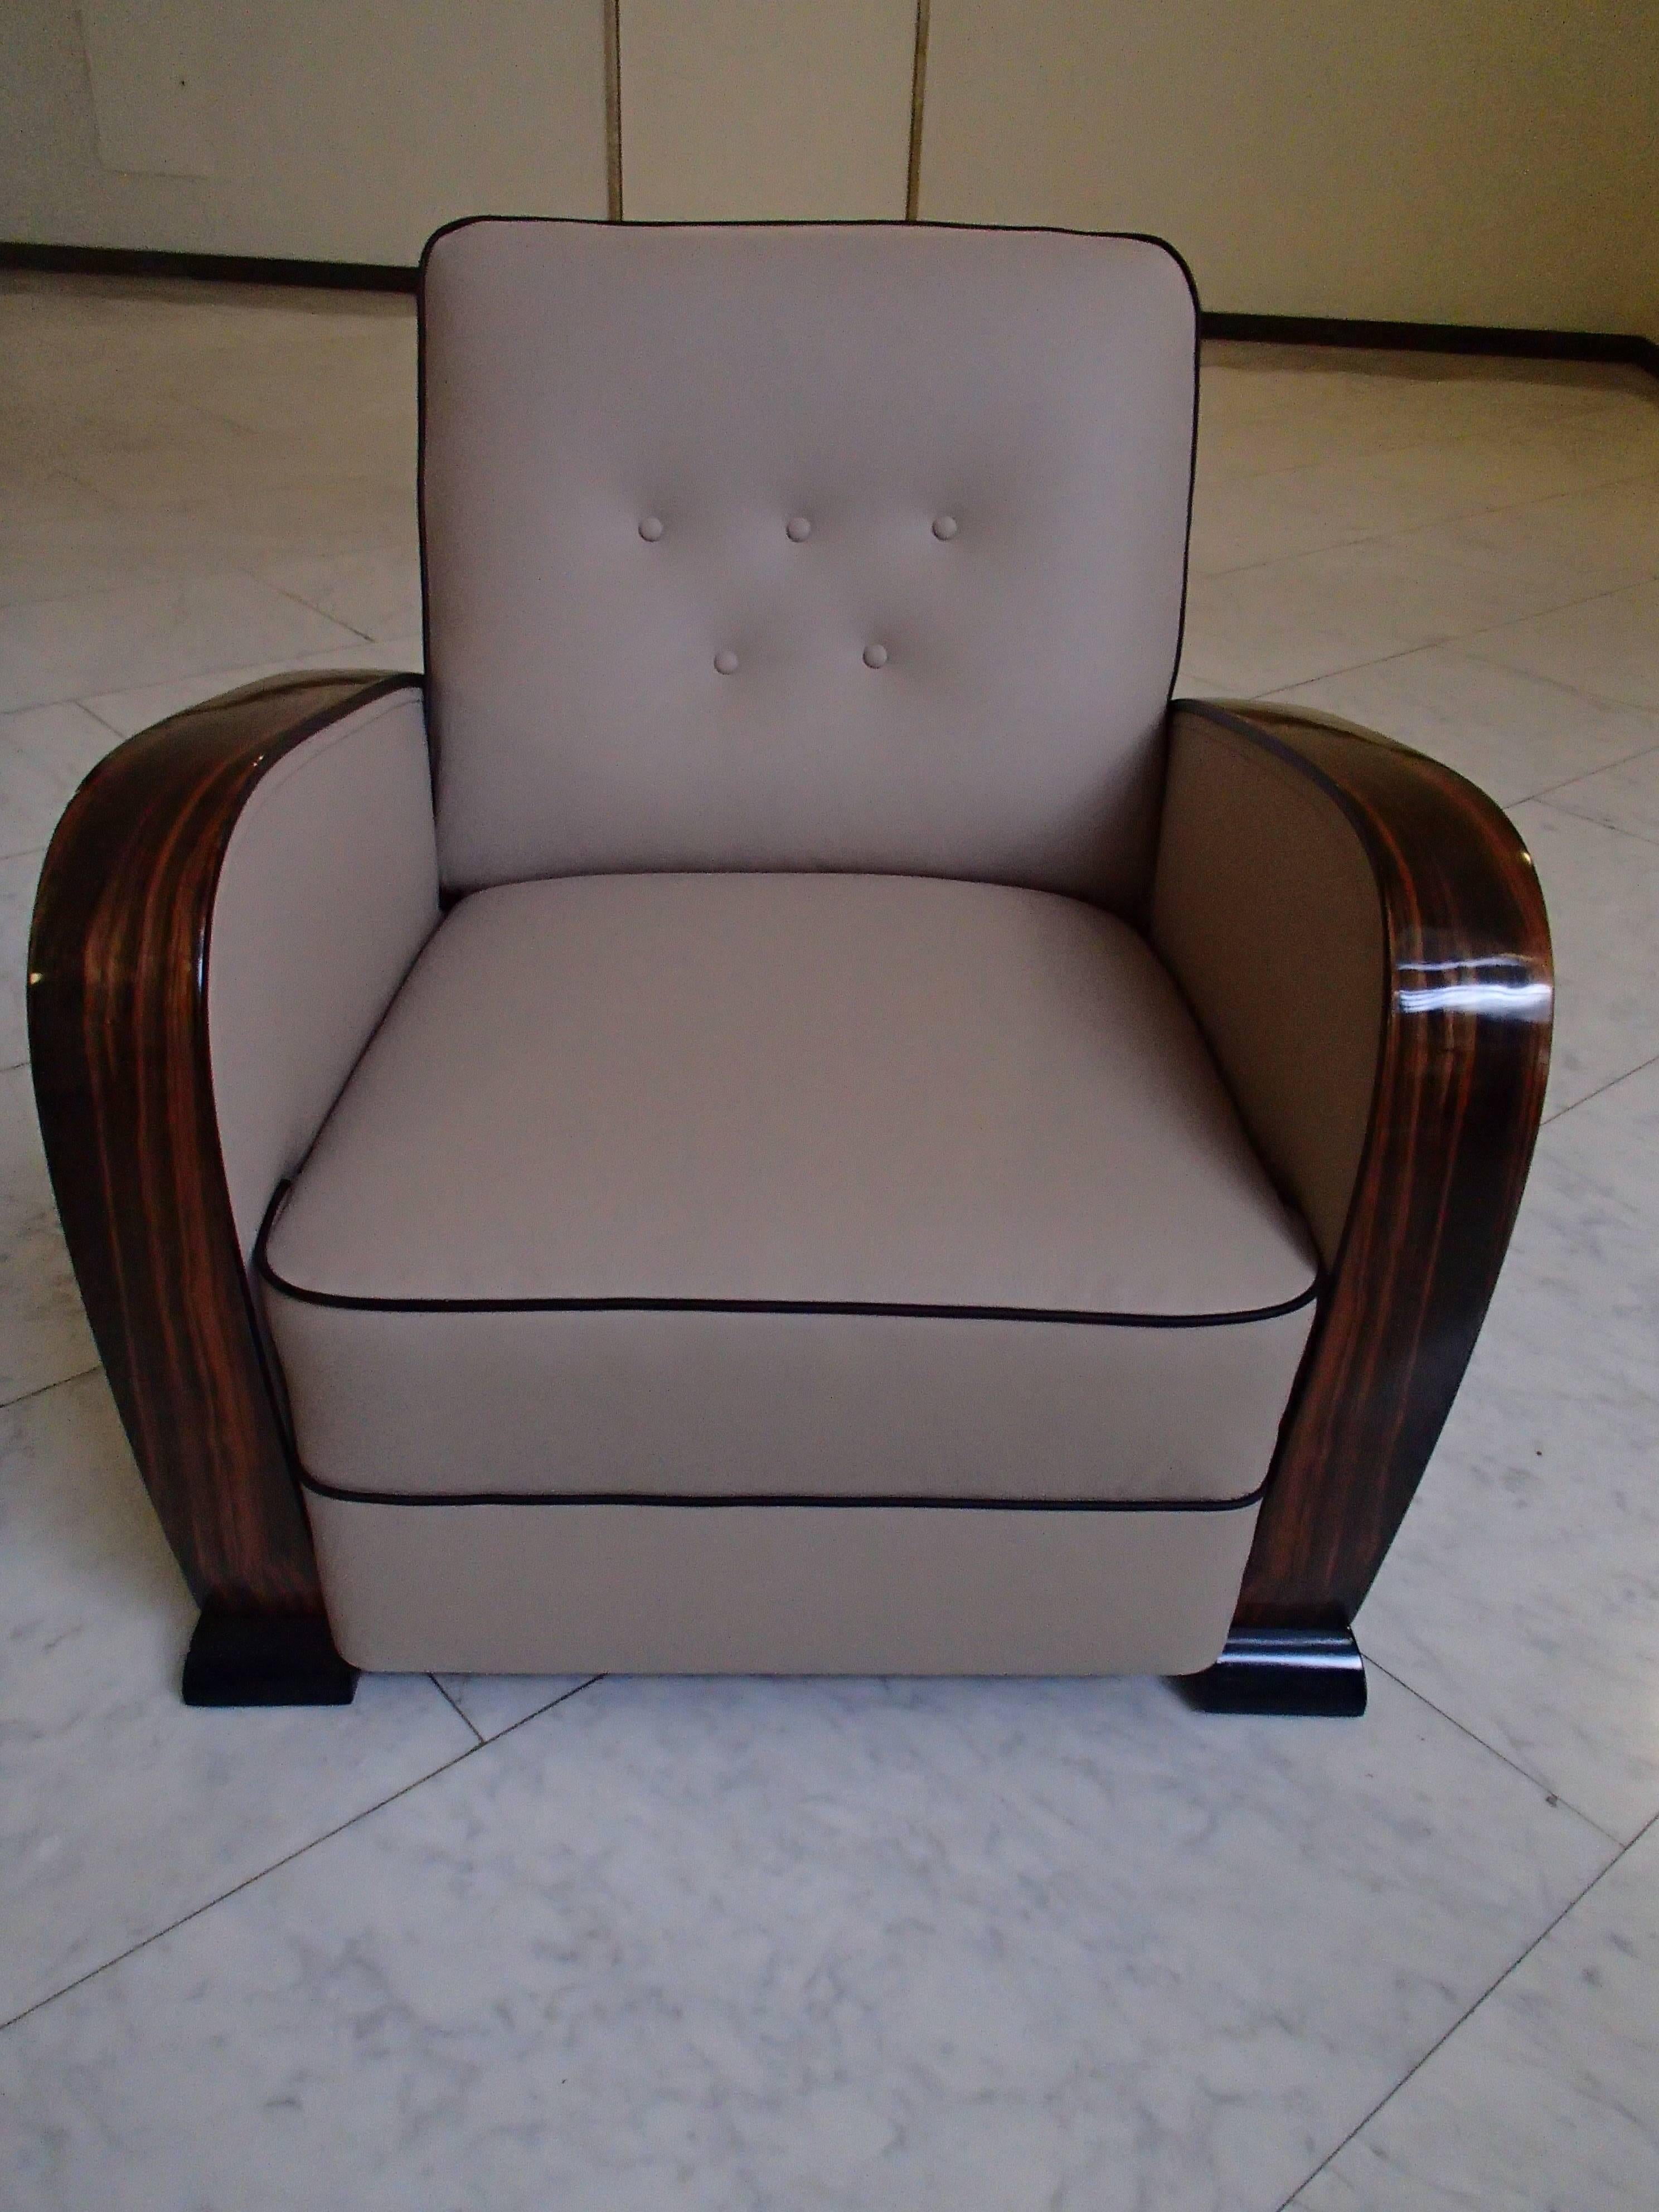 Art Deco leather club chair with ebene de macassar handles new upholstered and recovered with leather.